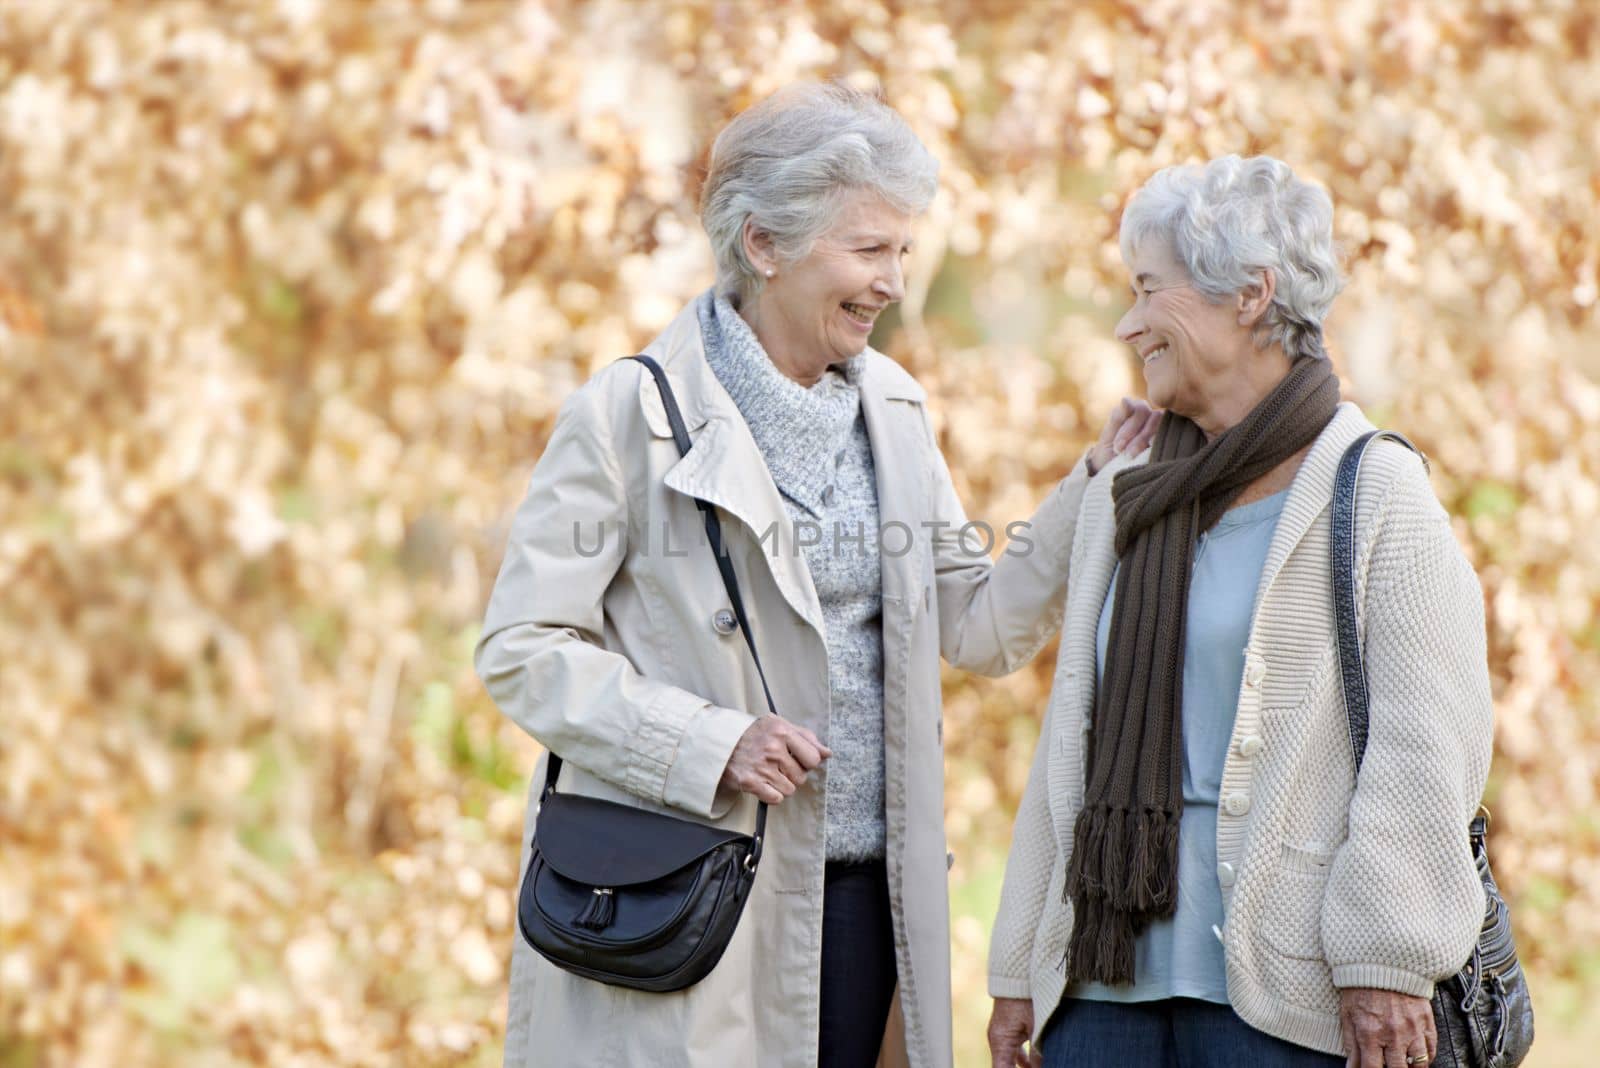 Friendship in their autumn years. Two senior women having a friendly conversation outside with autumn leaves in the background